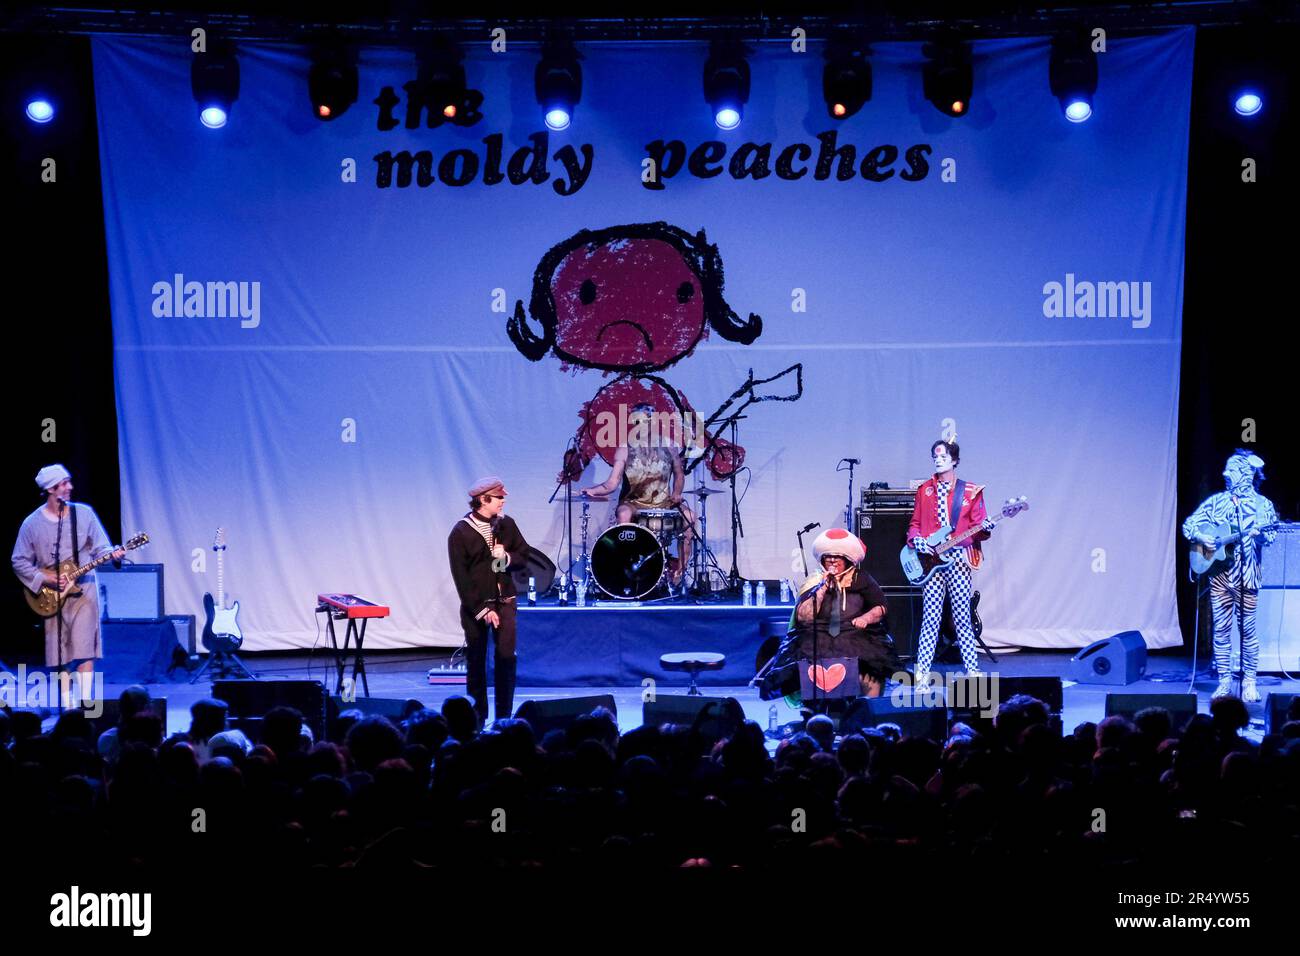 London, UK. 29th May, 2023. (L-R) Guitarist Jack Deshel, American singer-songwriter and lead vocalist Adam Green, drummer Brent Coles, vocalist Kimya Dawson, bass player Steve Mertens, and guitarist Toby Goodshank with American lo-fi indie folk rock band The Moldy Peaches performing live at The Roundhouse, London, UK Adam Green, and Kimya Dawsom with New York alternative indie band The Moldy Peaches reunite to perform for the first time as a band in 20 years. Credit: SOPA Images Limited/Alamy Live News Stock Photo